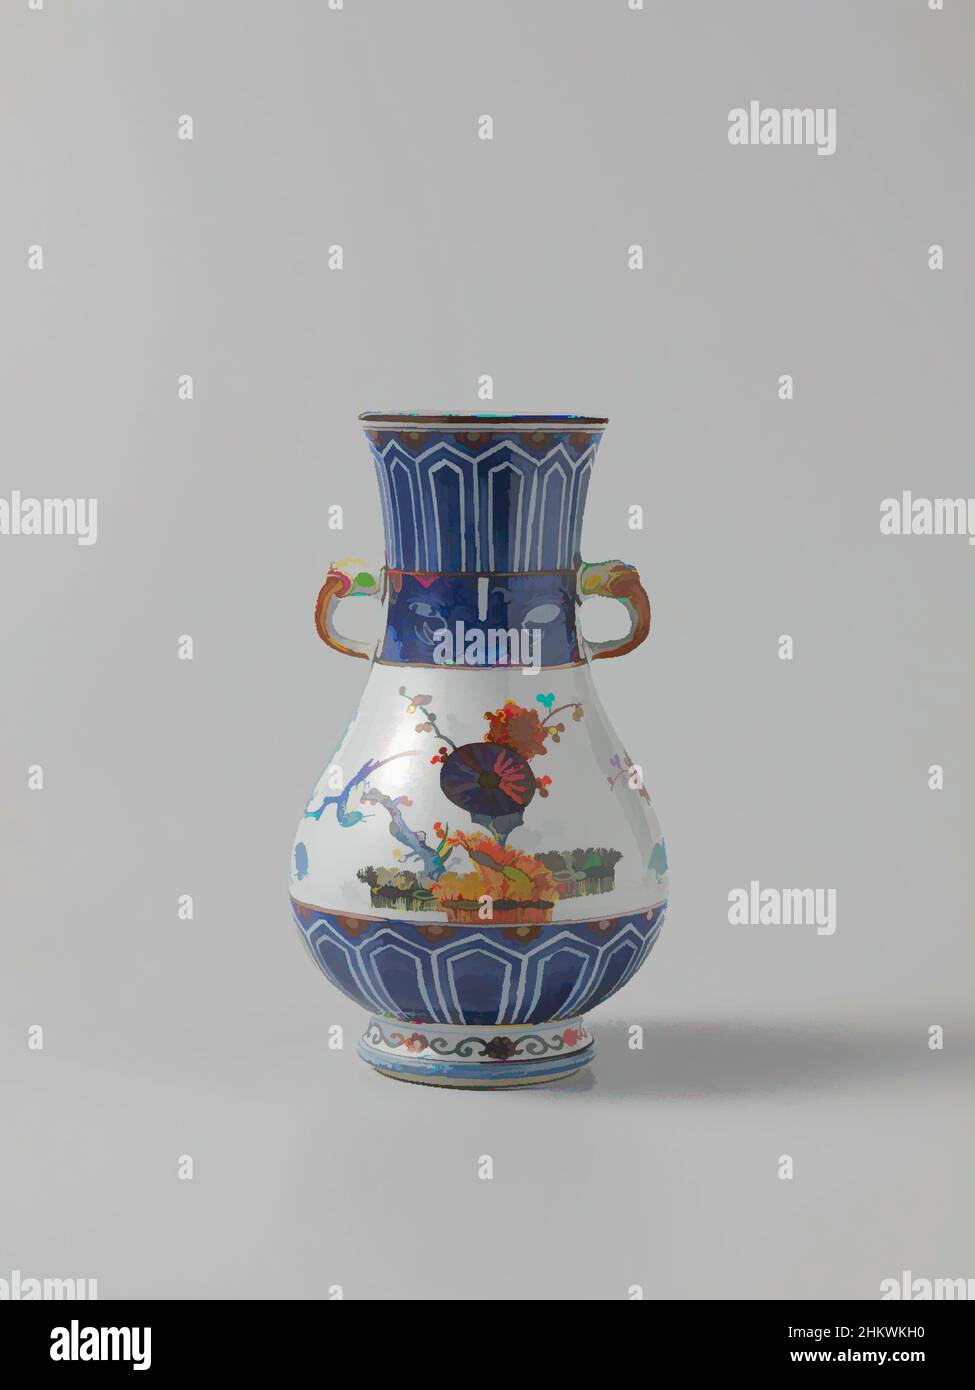 Art inspired by Pear-shaped vase with ornamental borders, flowering plants, brushwood fences and birds, Pear-shaped vase of porcelain with a wide, slightly spreading neck and two modeled ears in the shape of animal heads. Painted in underglaze blue and on the glaze blue, red, green, Classic works modernized by Artotop with a splash of modernity. Shapes, color and value, eye-catching visual impact on art. Emotions through freedom of artworks in a contemporary way. A timeless message pursuing a wildly creative new direction. Artists turning to the digital medium and creating the Artotop NFT Stock Photo